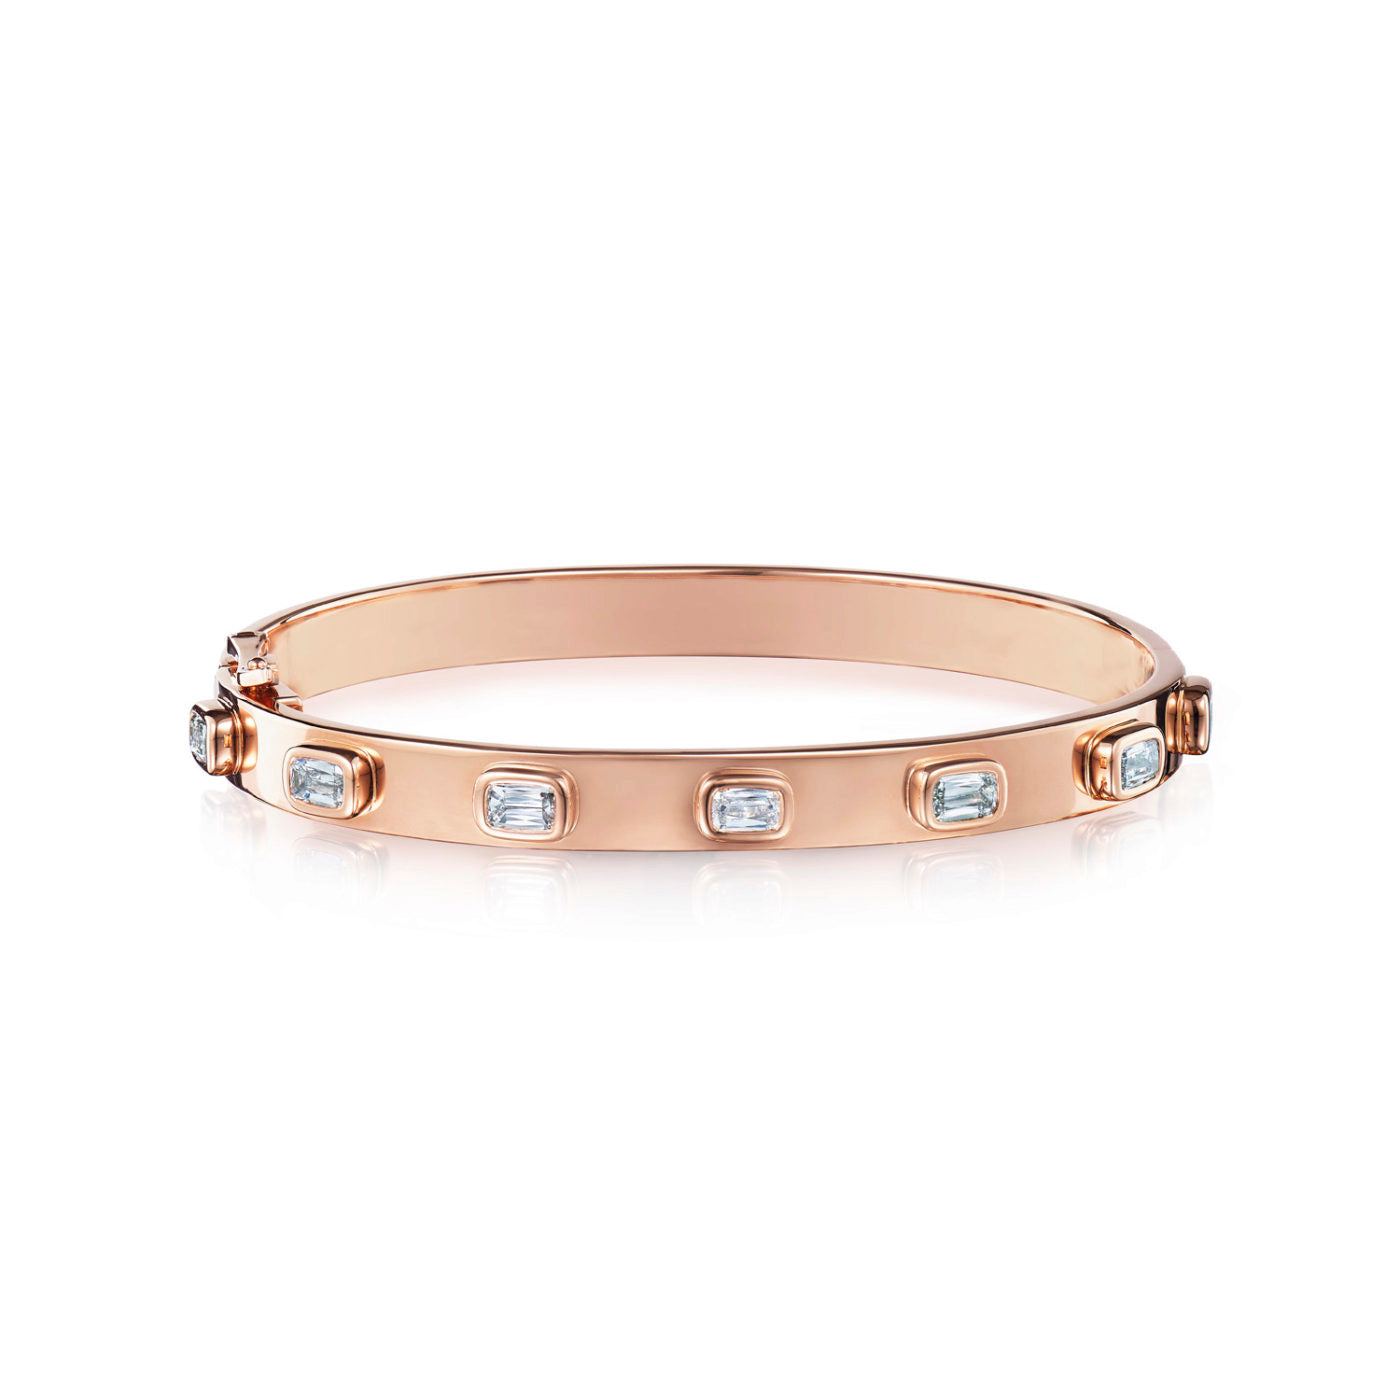 Cobblestone Bracelet with Diamond Accents in 18K Rose Gold, Style B-19537-0-DIA-18KP